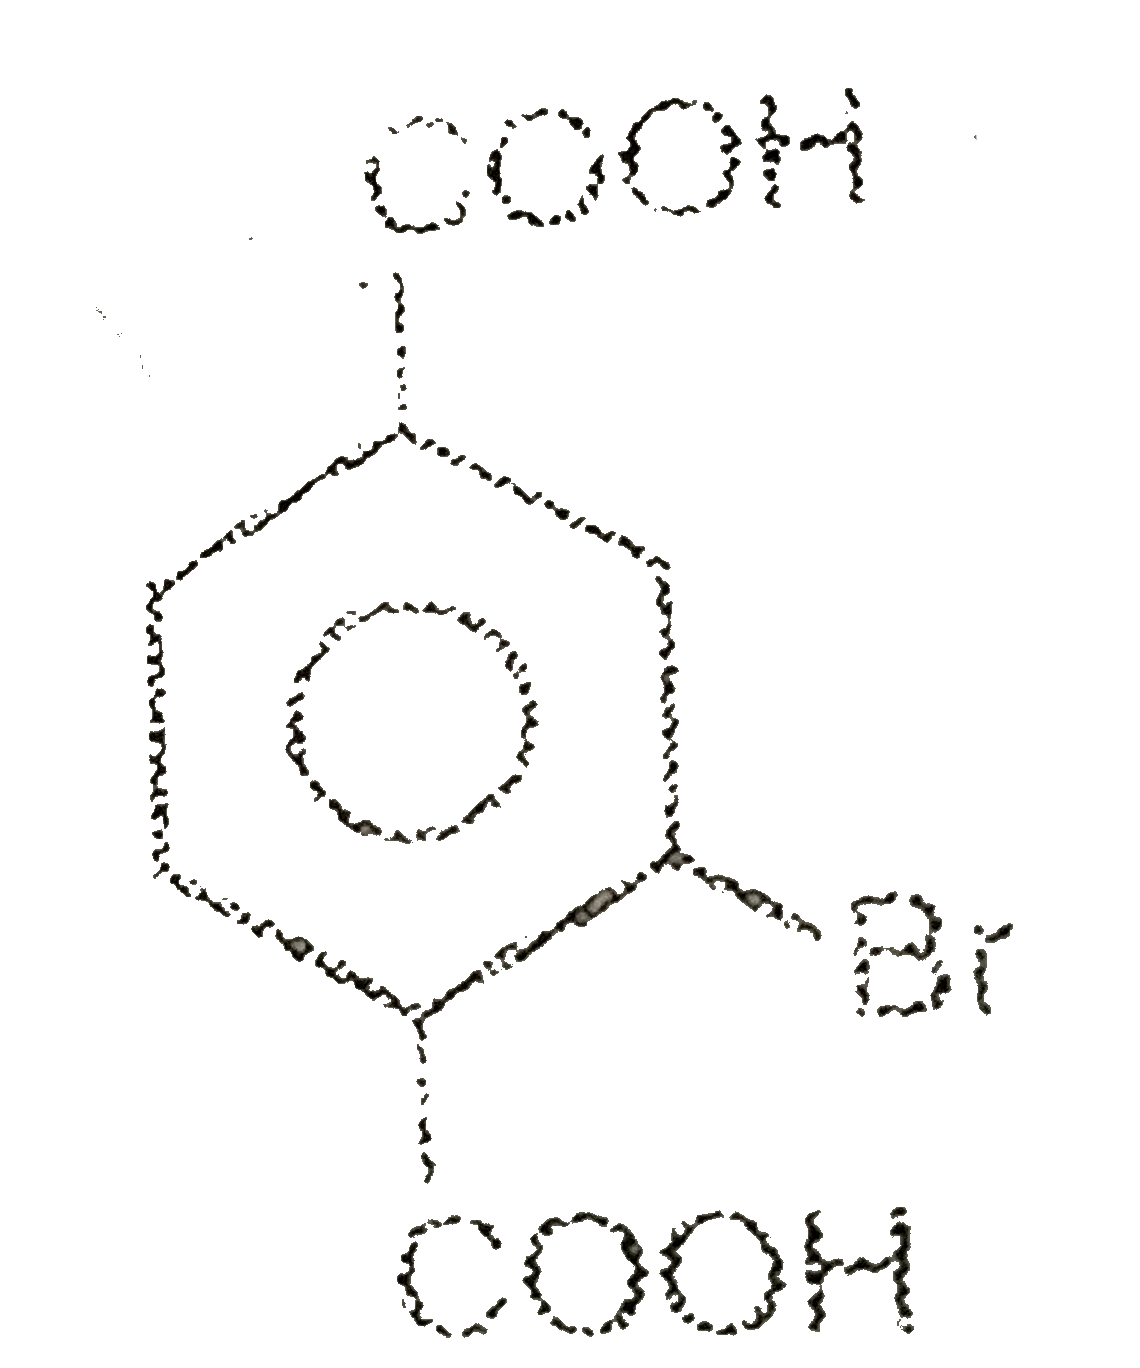 IUPAC name of the following molecule is